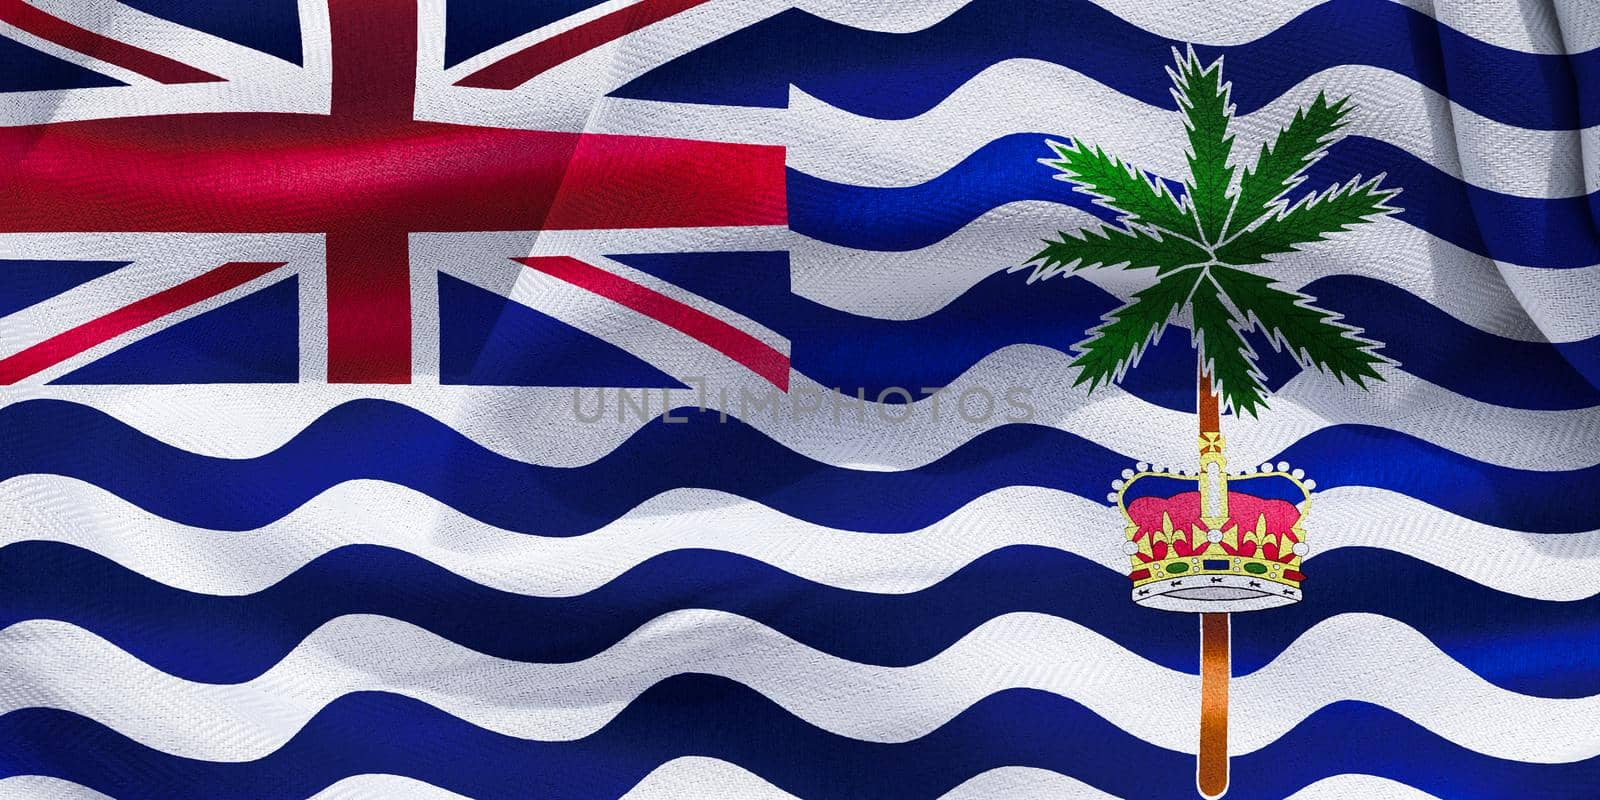 3D-Illustration of a British Indian Ocean Territory flag - realistic waving fabric flag by MP_foto71